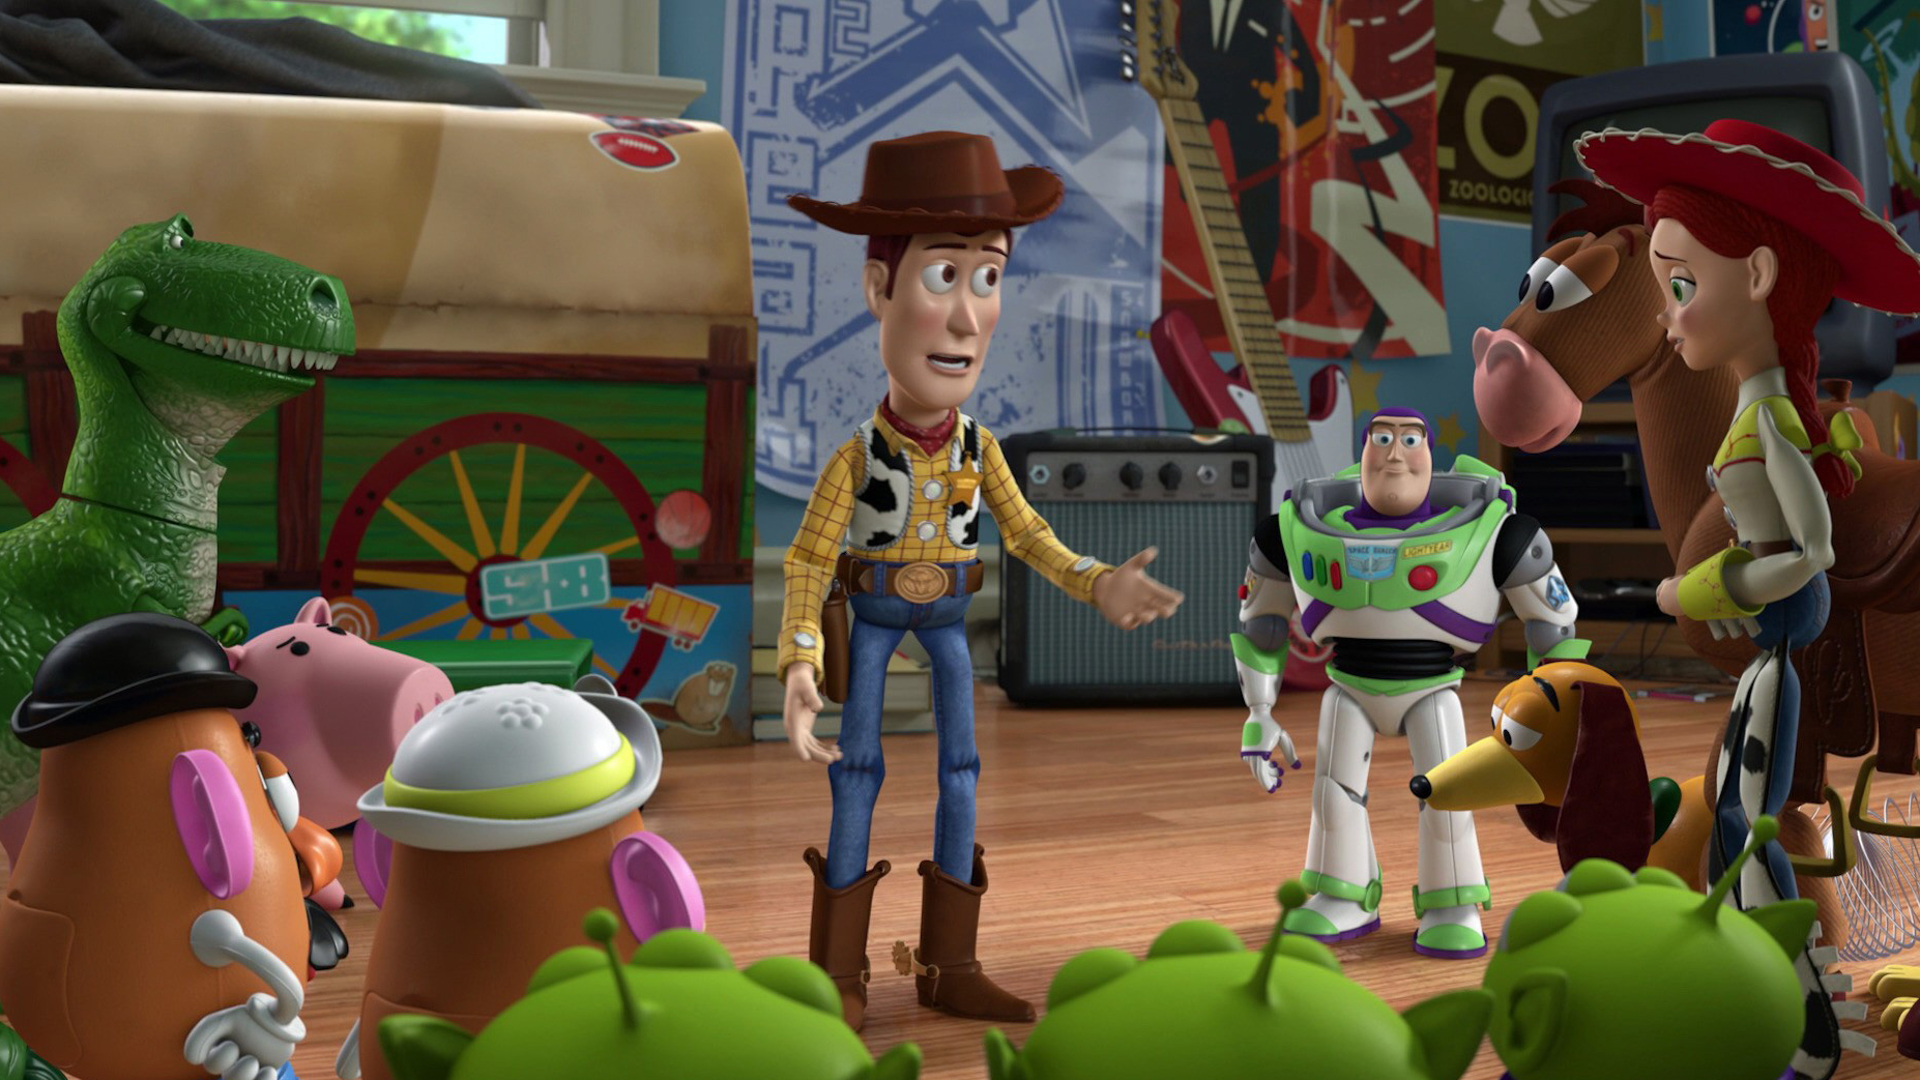 Movie Toy Story 3 HD Wallpaper Background Image. 